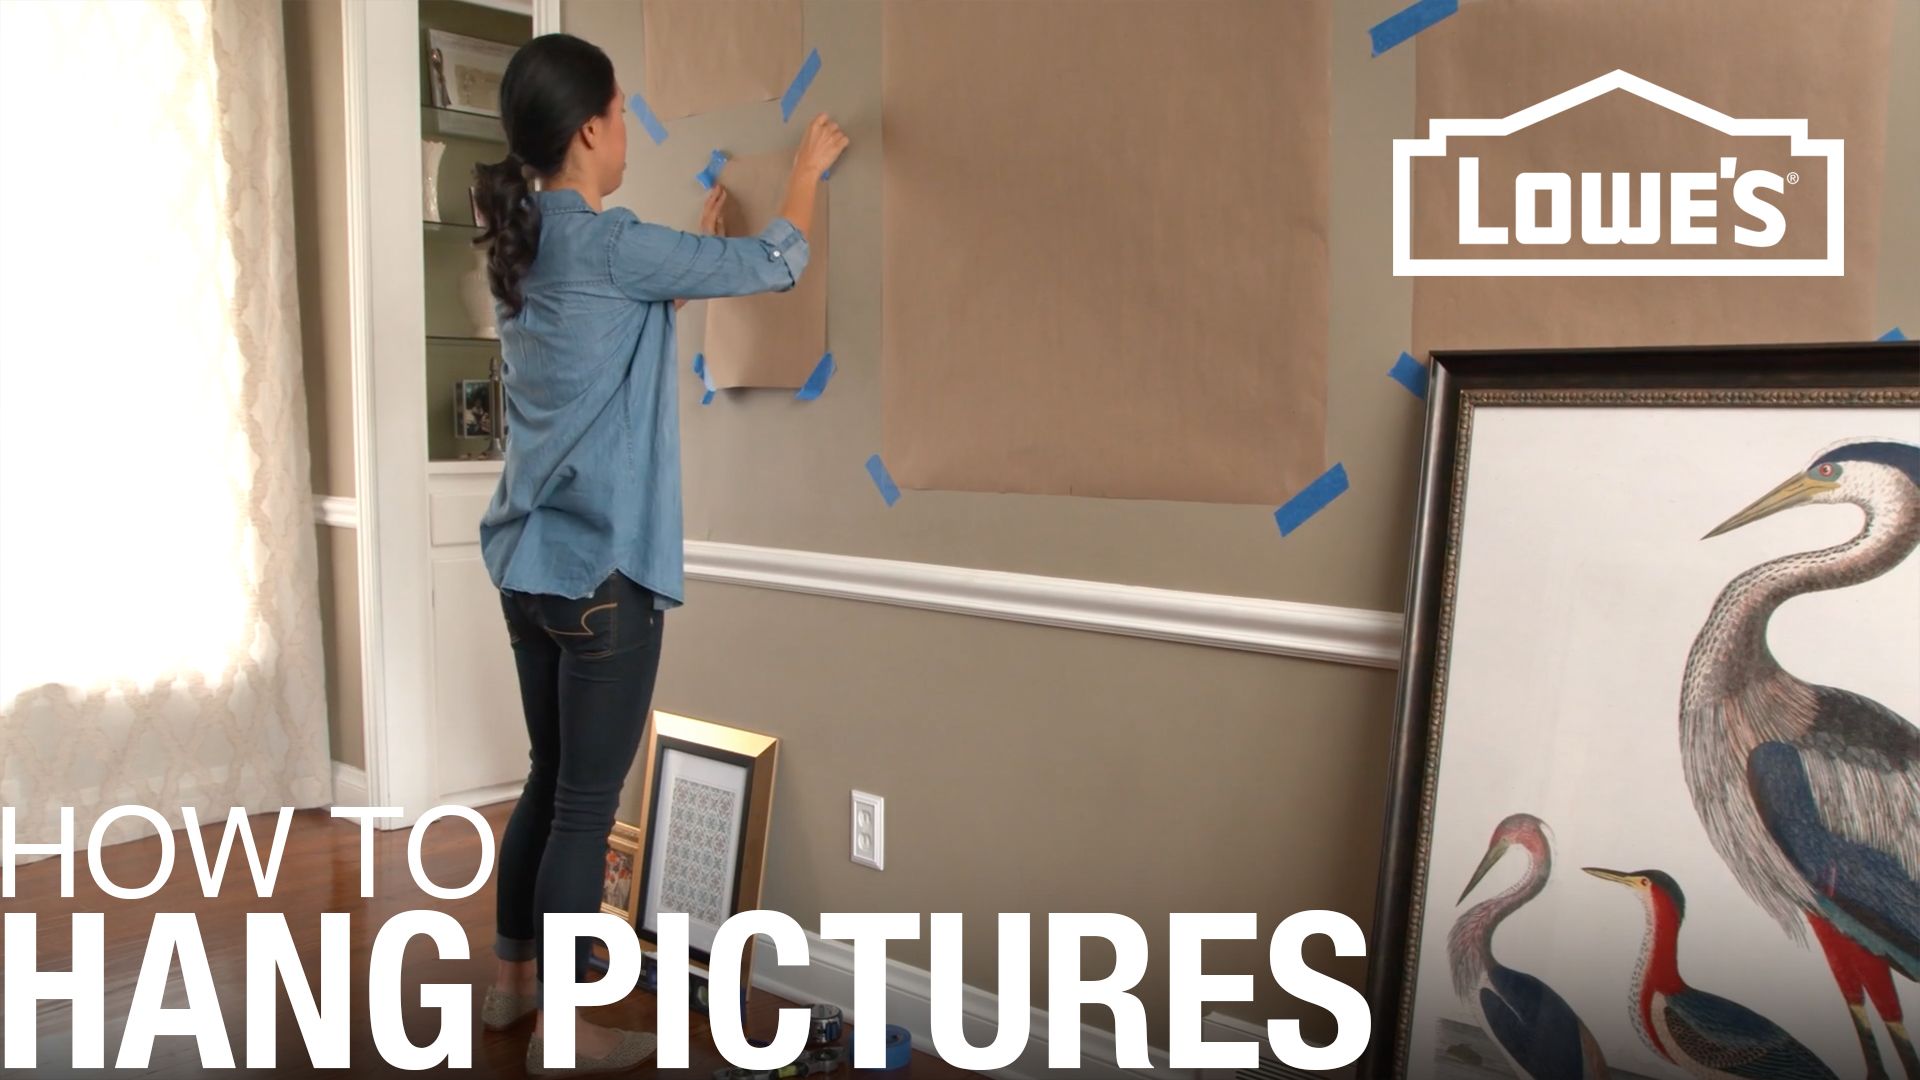 Hanging Picture Frames or Gallery Wall Frames | Lowe's